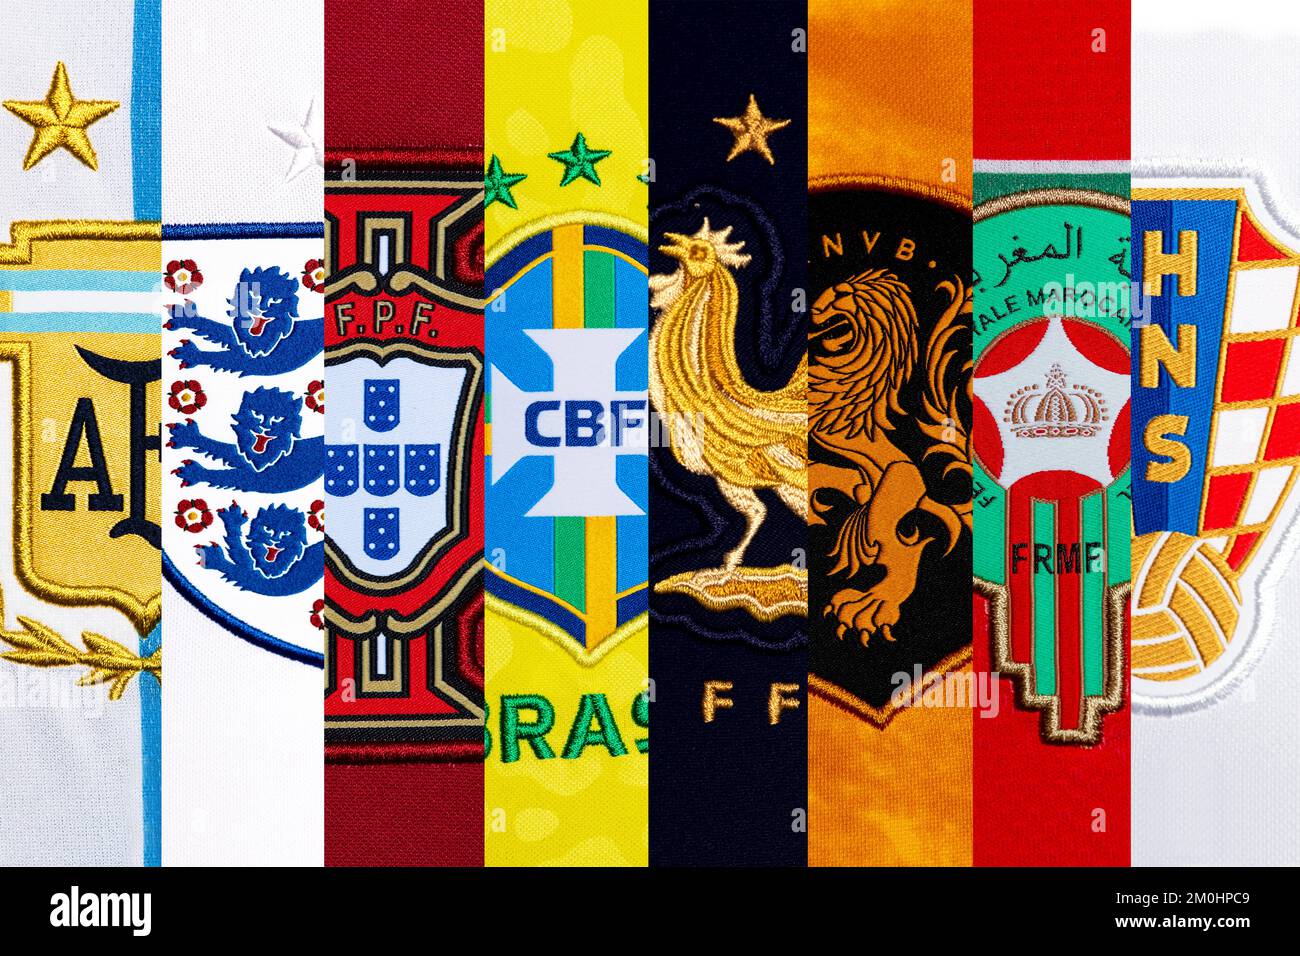 Close up of National Football team crest on home kit. Quarter Finalists FIFA World Cup Qatar 2022. Stock Photo